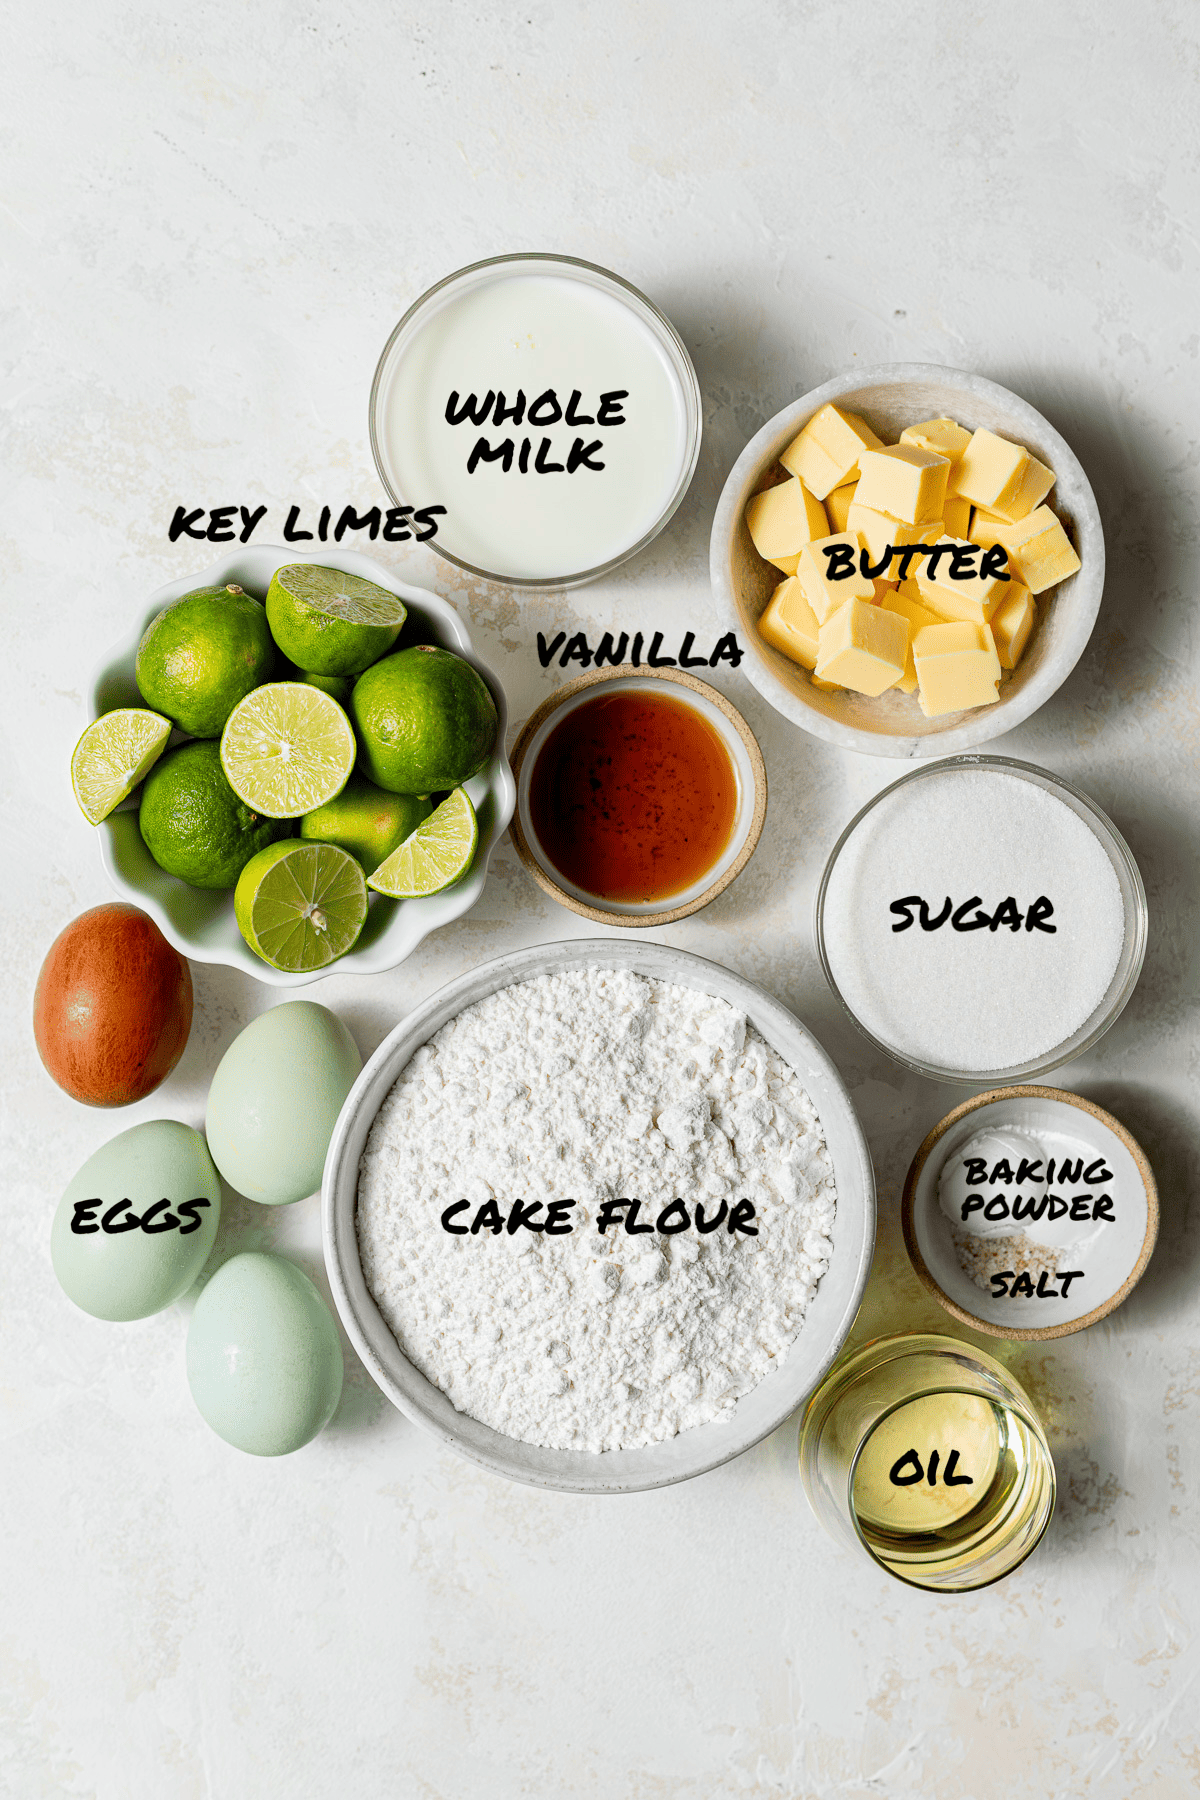 ingredients for key lime cake.